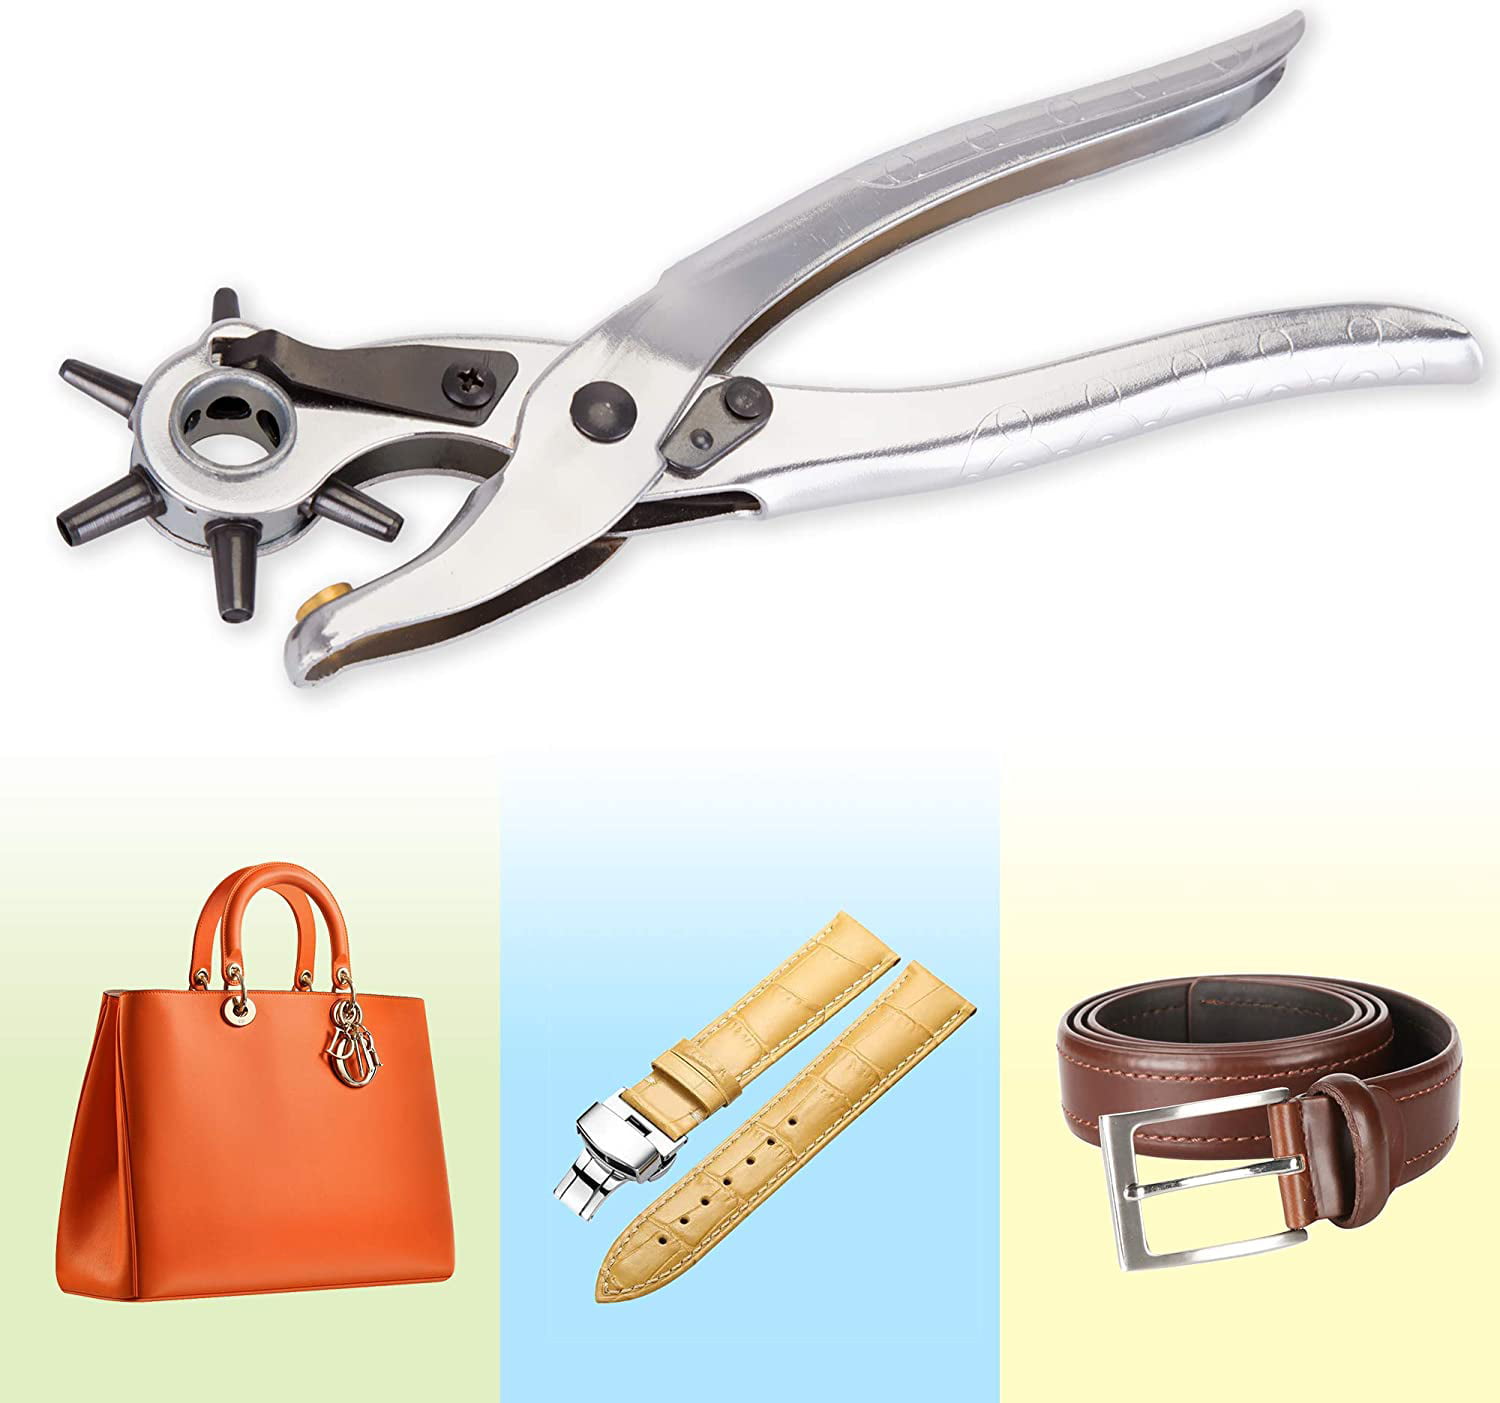  Revolving Leather Belt Hole Punch Plier, Eyelet and Snap  Setting Pliers Hand Puncher Tool Kit Great for Crafts, DIY, Belts, Dog  Collars, Watch Bands, Paper, Includes 100 Eyelet and 100